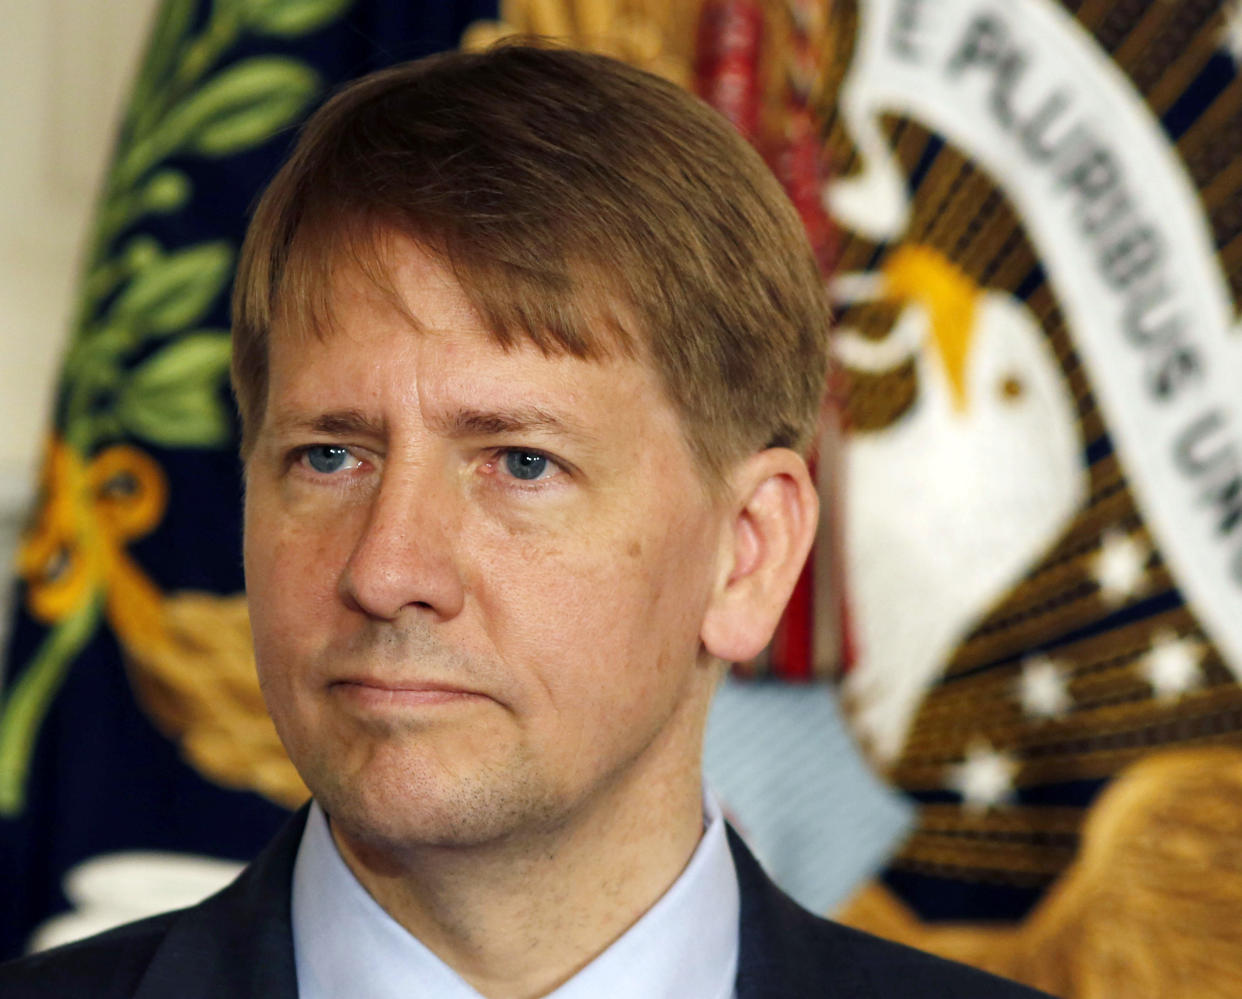 Director of the Consumer Financial Protection Bureau Richard Cordray is seen in the State Dining Room at the White House in Washington July 17, 2013.  The U.S. Senate on Tuesday confirmed Cordray as director of the Consumer Financial Protection Bureau, ending a nearly two-year standoff in Congress and putting the new agency on sounder legal footing.      REUTERS/Larry Downing  (UNITED STATES - Tags: POLITICS BUSINESS HEADSHOT PROFILE)